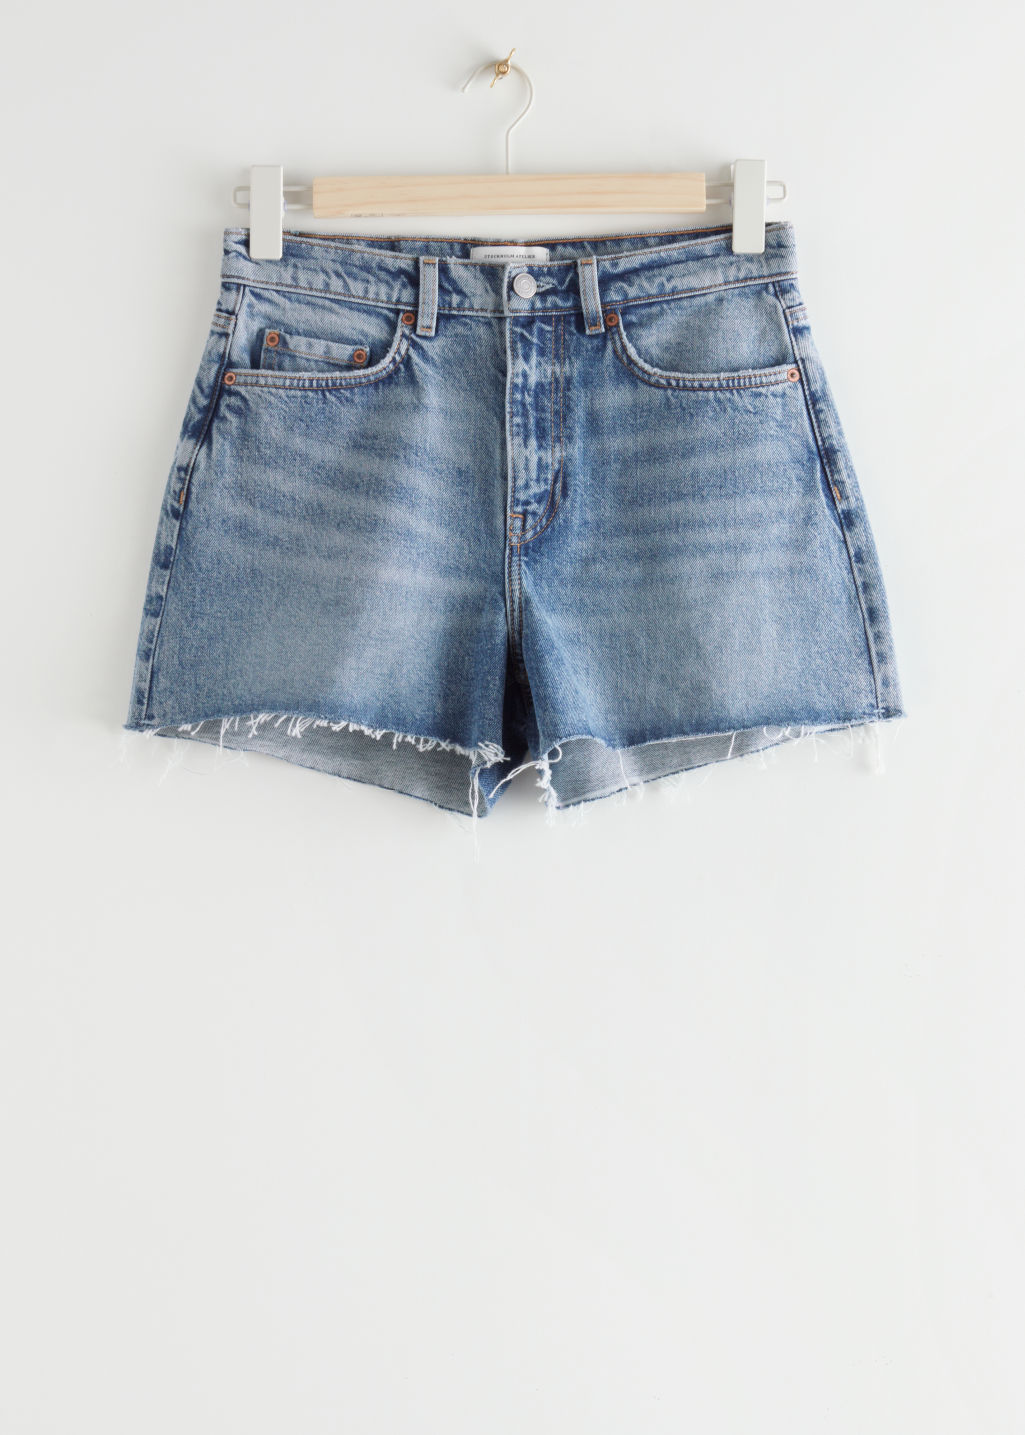 High Waist Cut Off Jeans Shorts - Light Blue - Shorts - & Other Stories - Click Image to Close